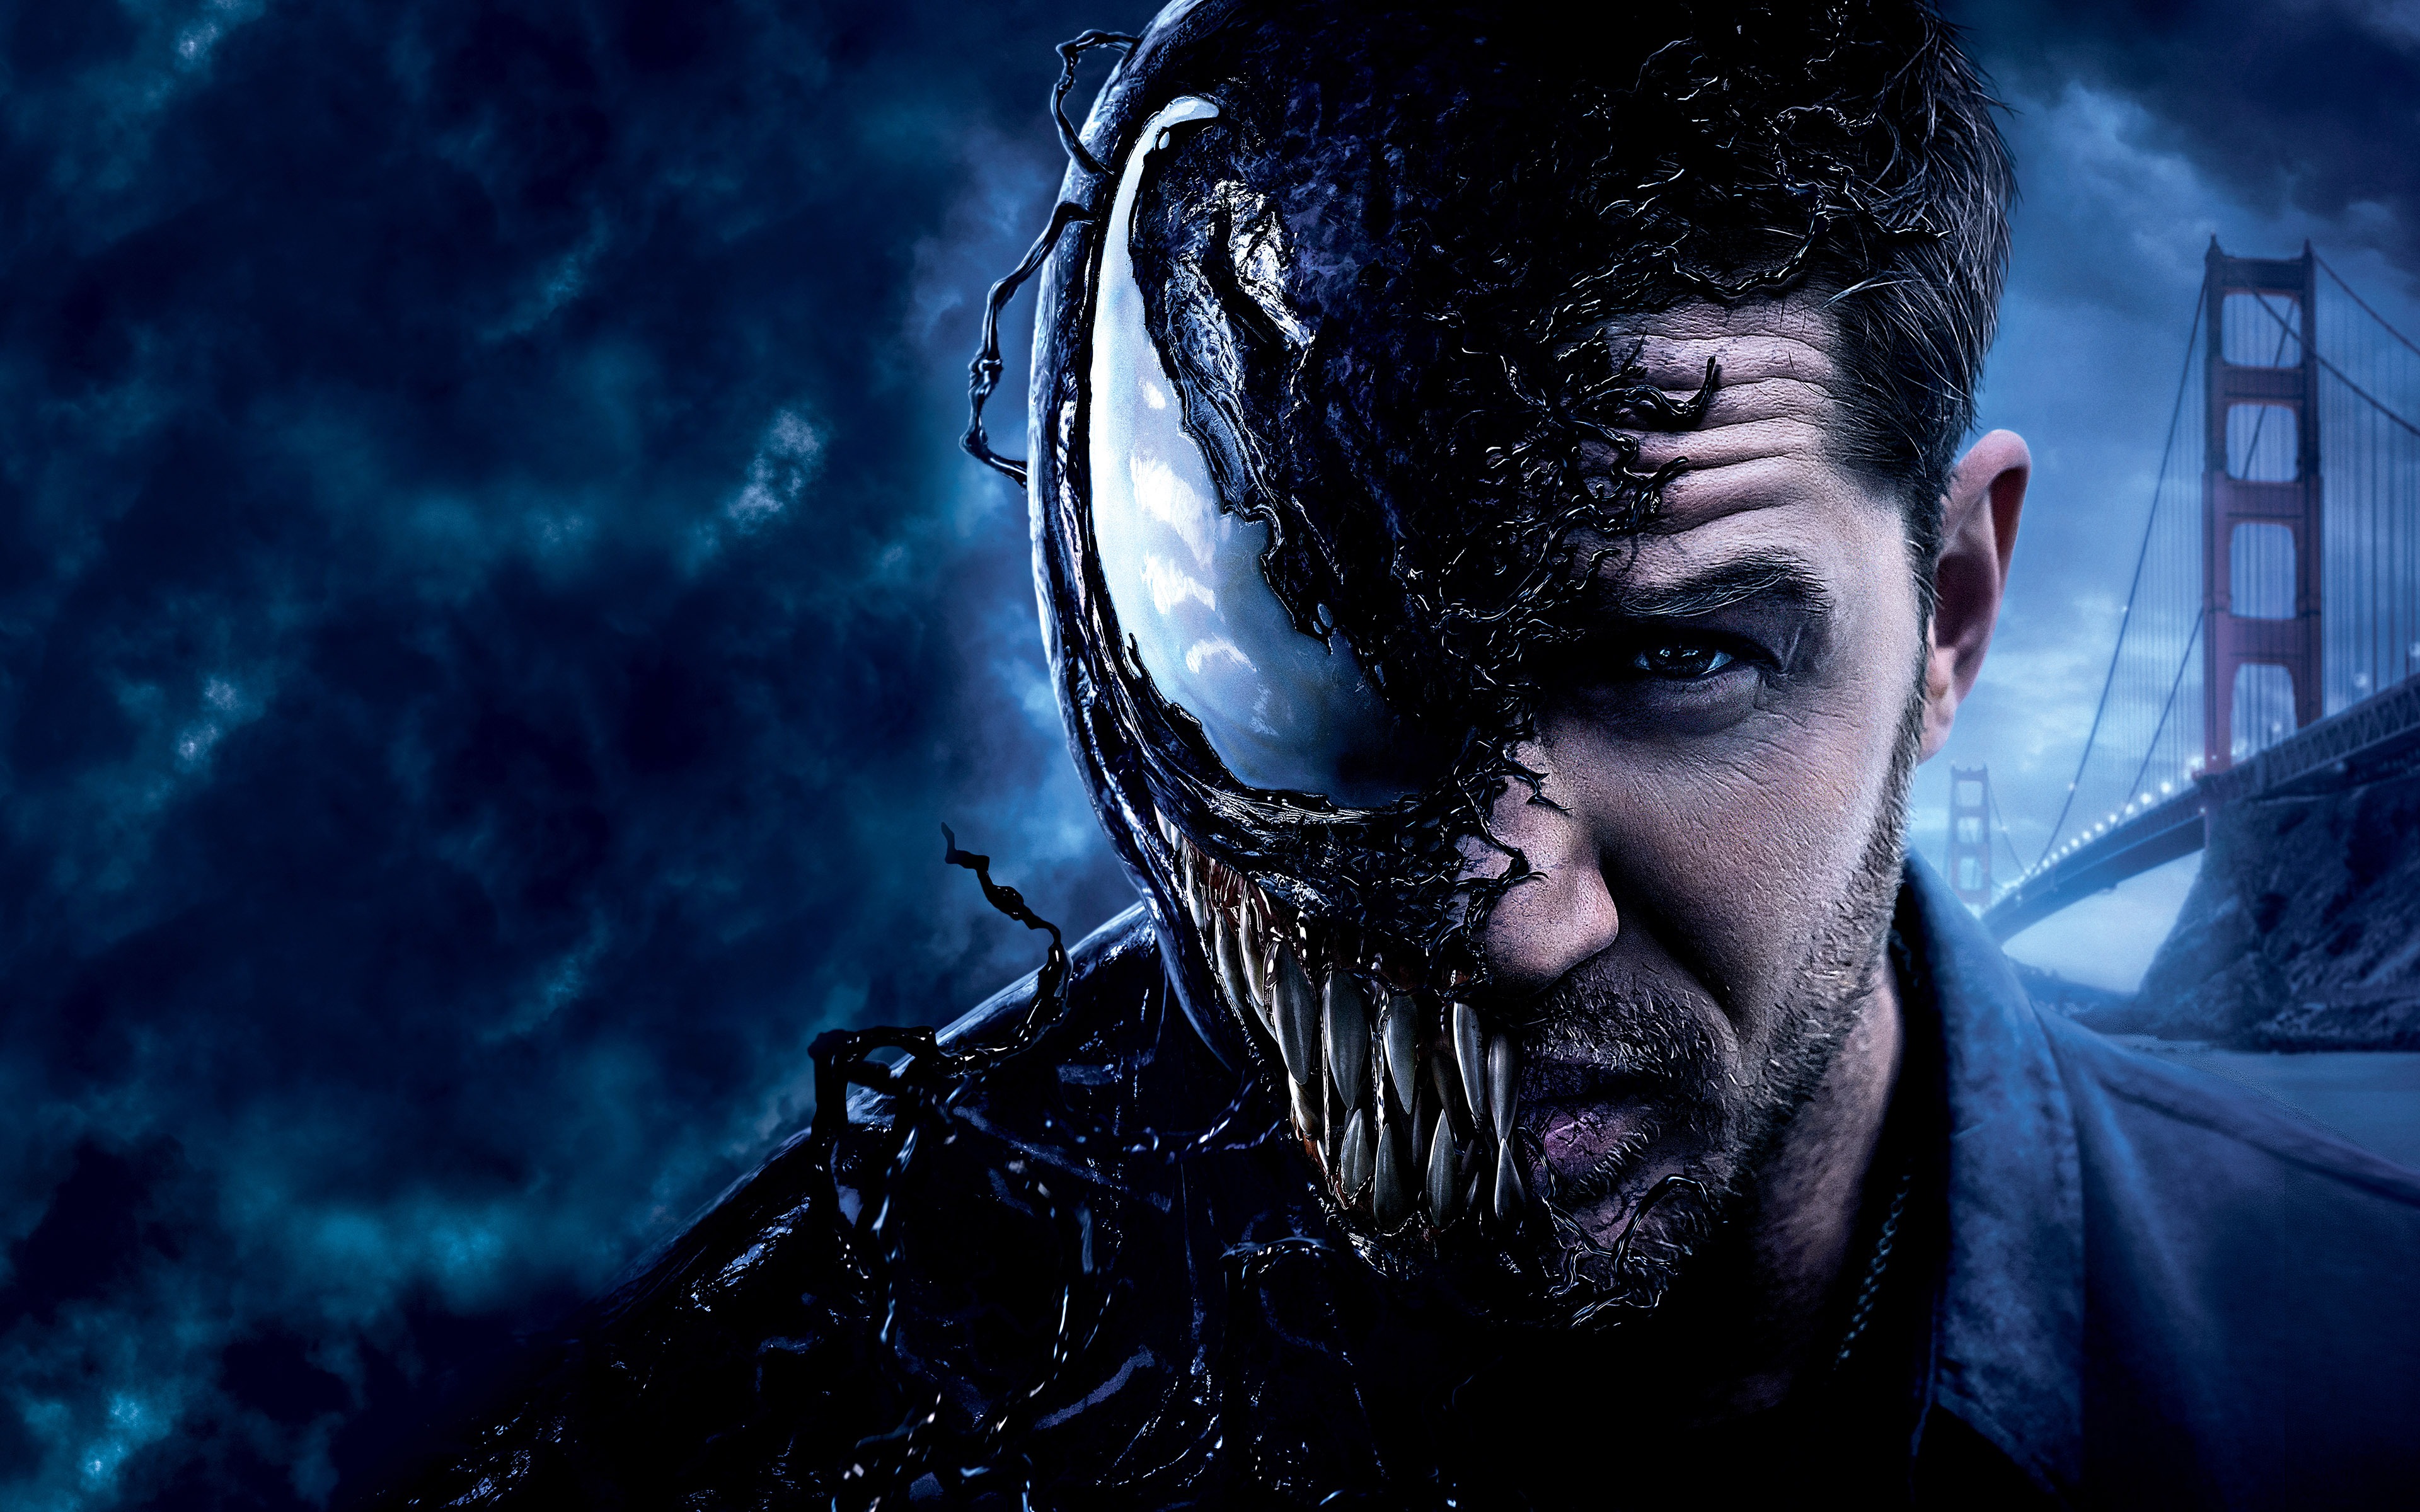 Venom For Pc Wallpapers Wallpaper Cave